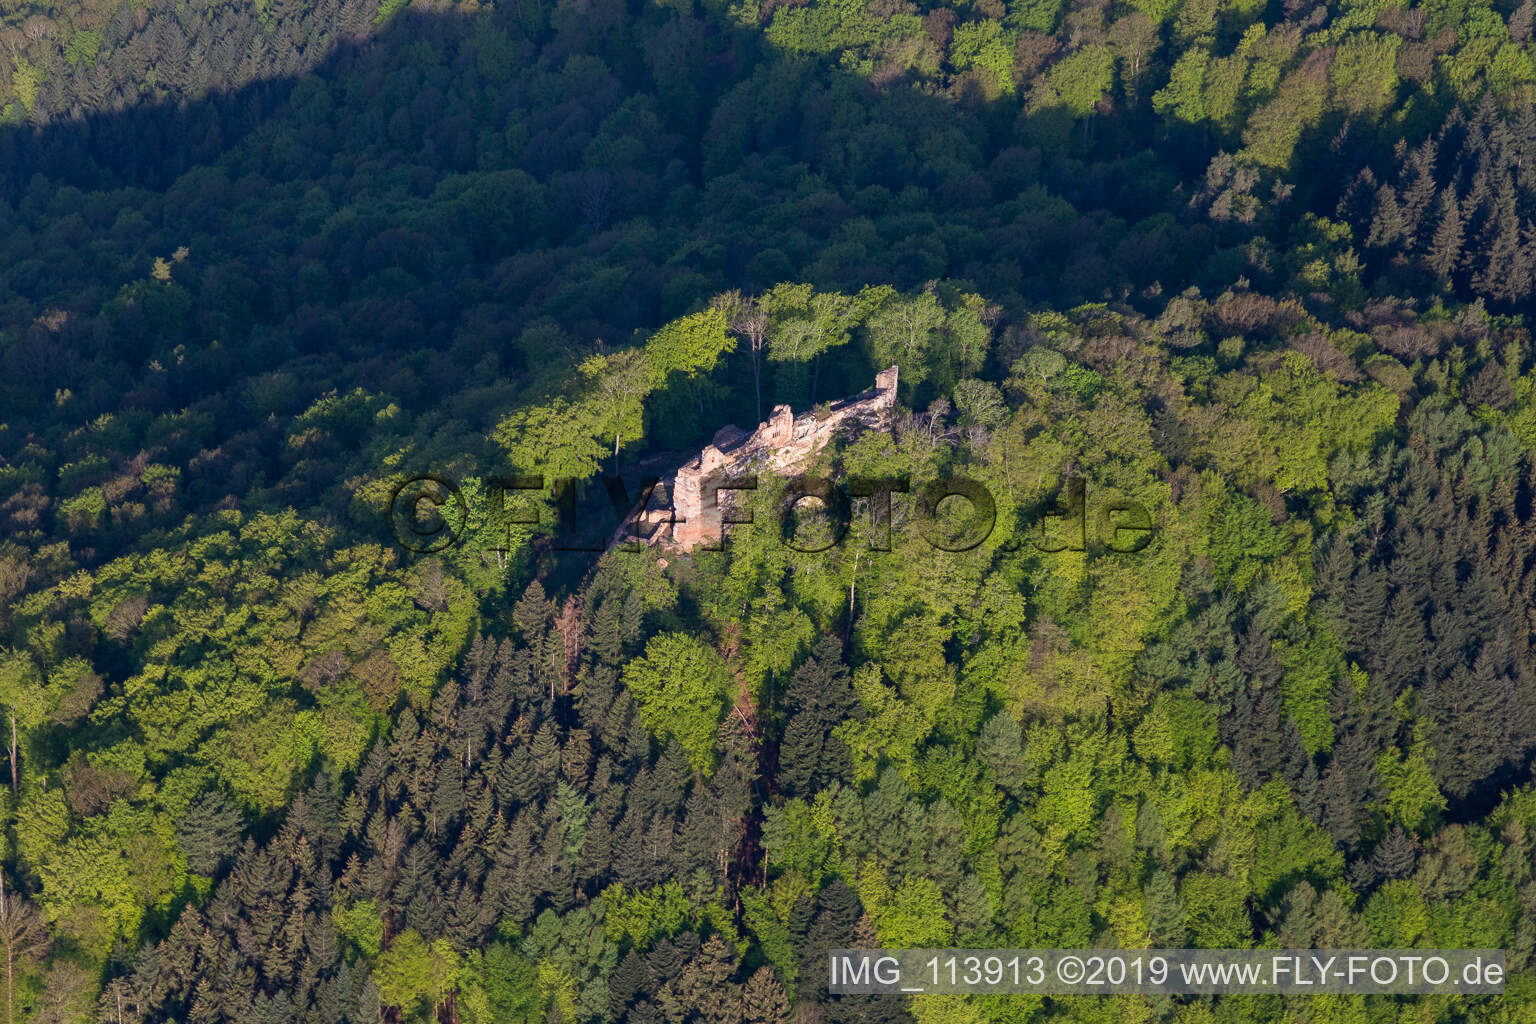 Aerial view of Ruins and vestiges of the former castle and fortress Burg Meistersel in Ramberg in the state Rhineland-Palatinate, Germany